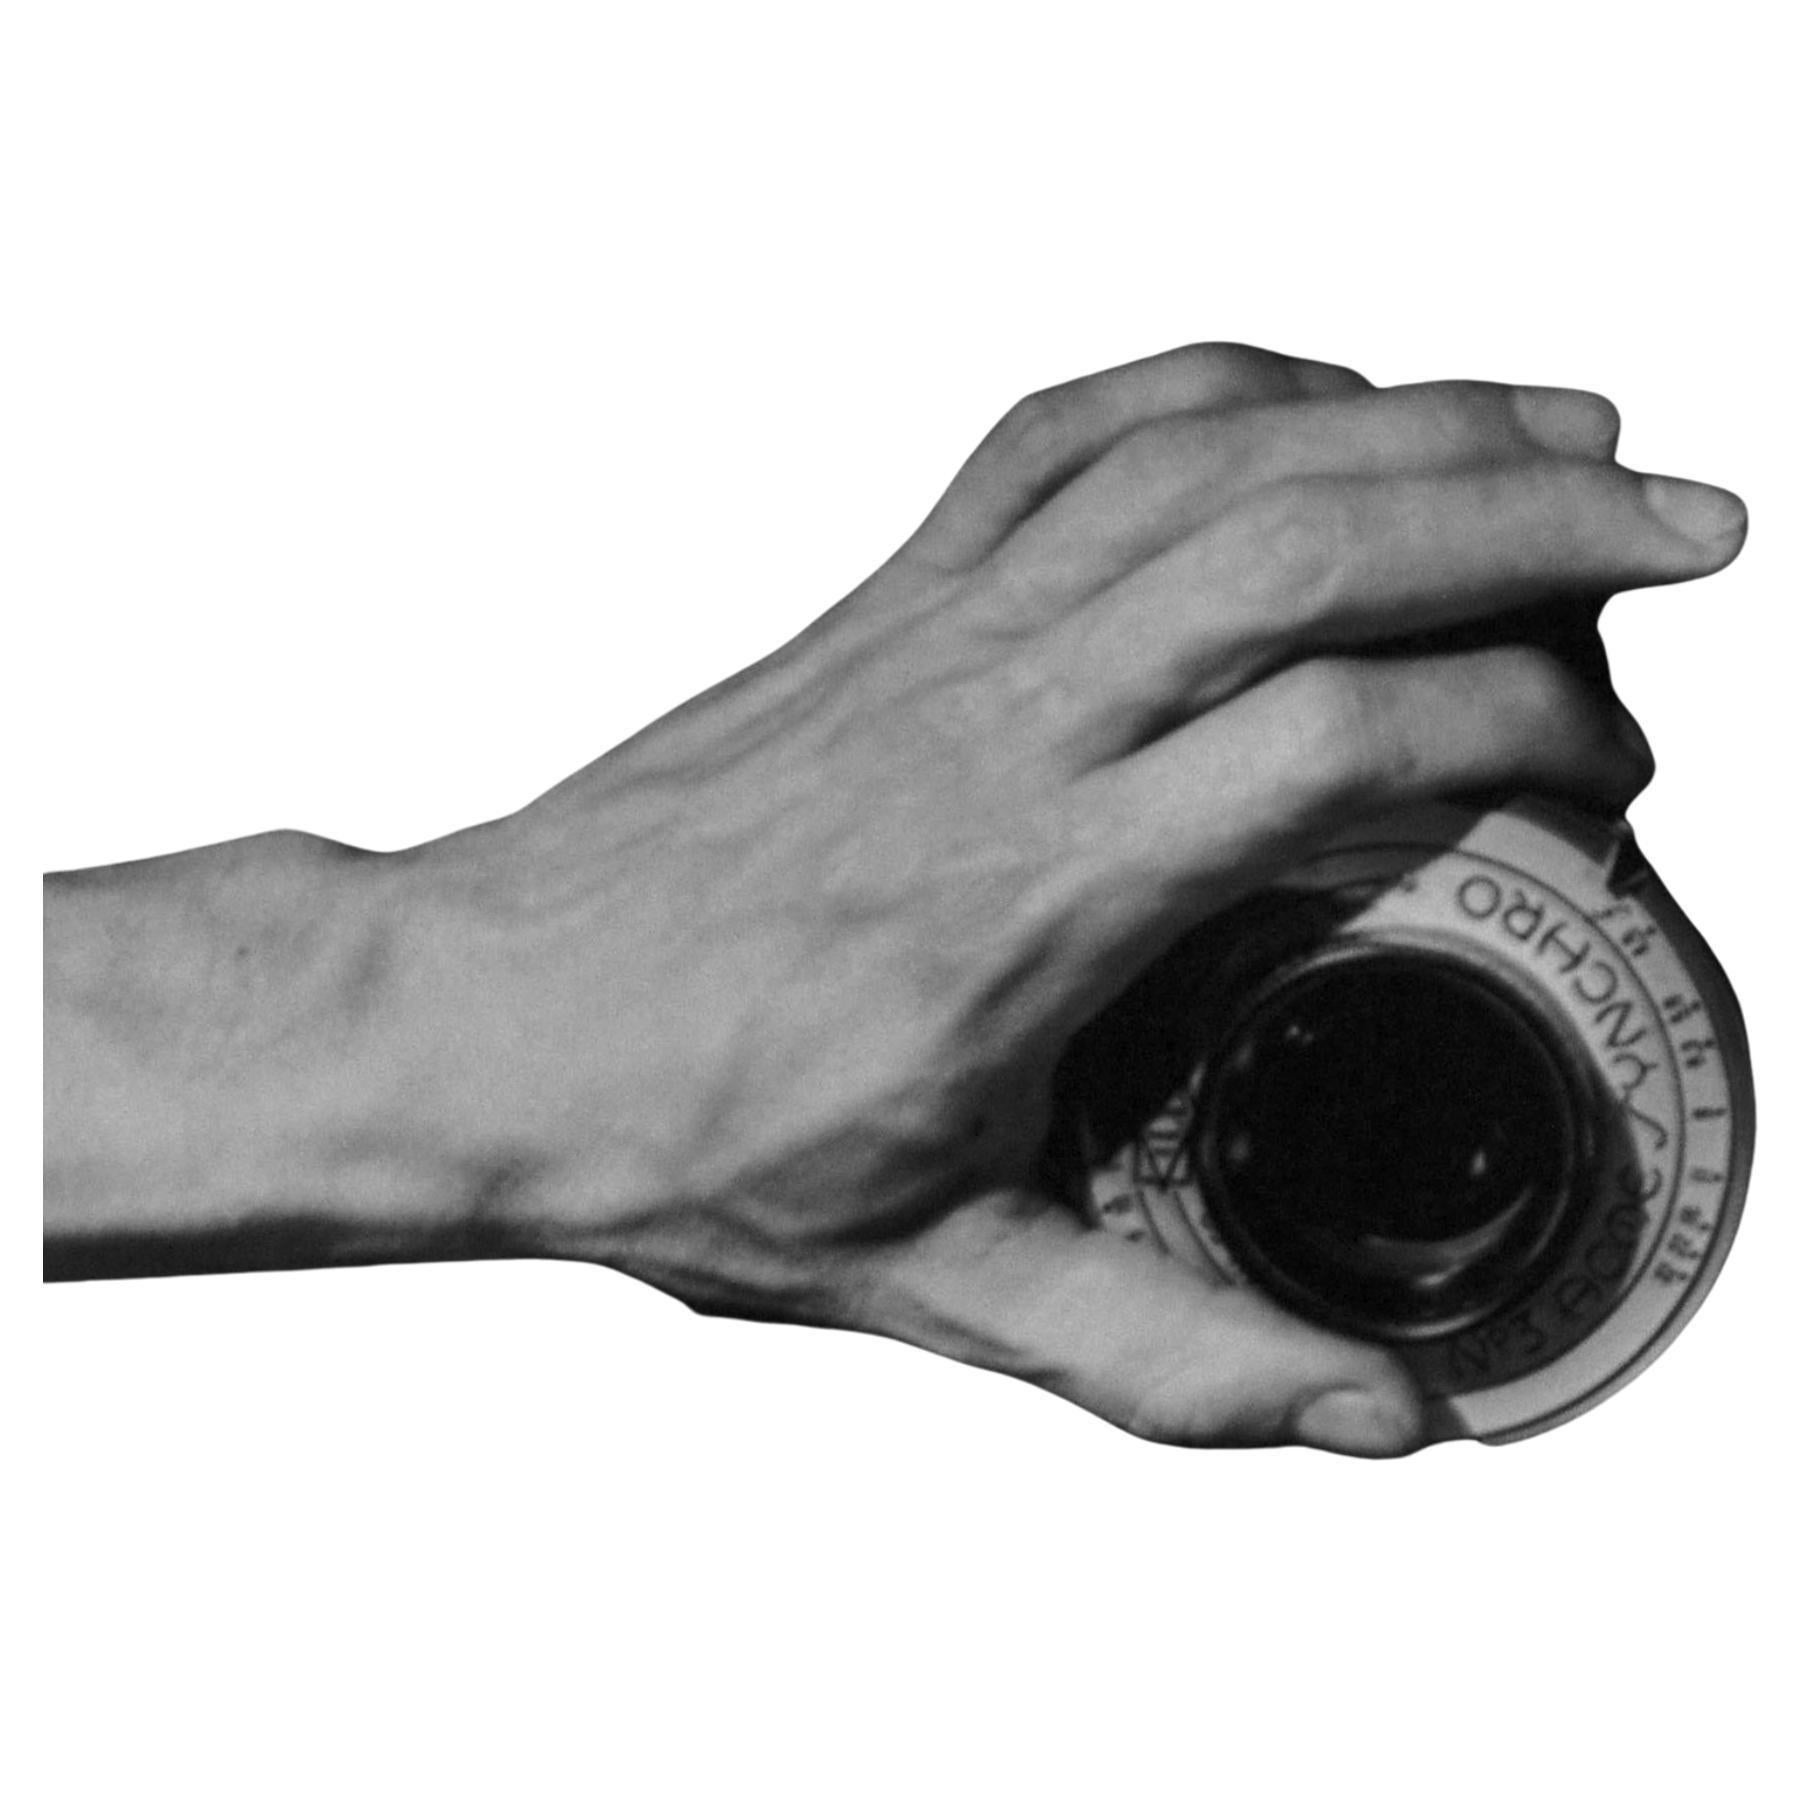 Hand on the Camera, Mexico. Figurative black and white photograph. Framed - Photograph by Leo Matiz